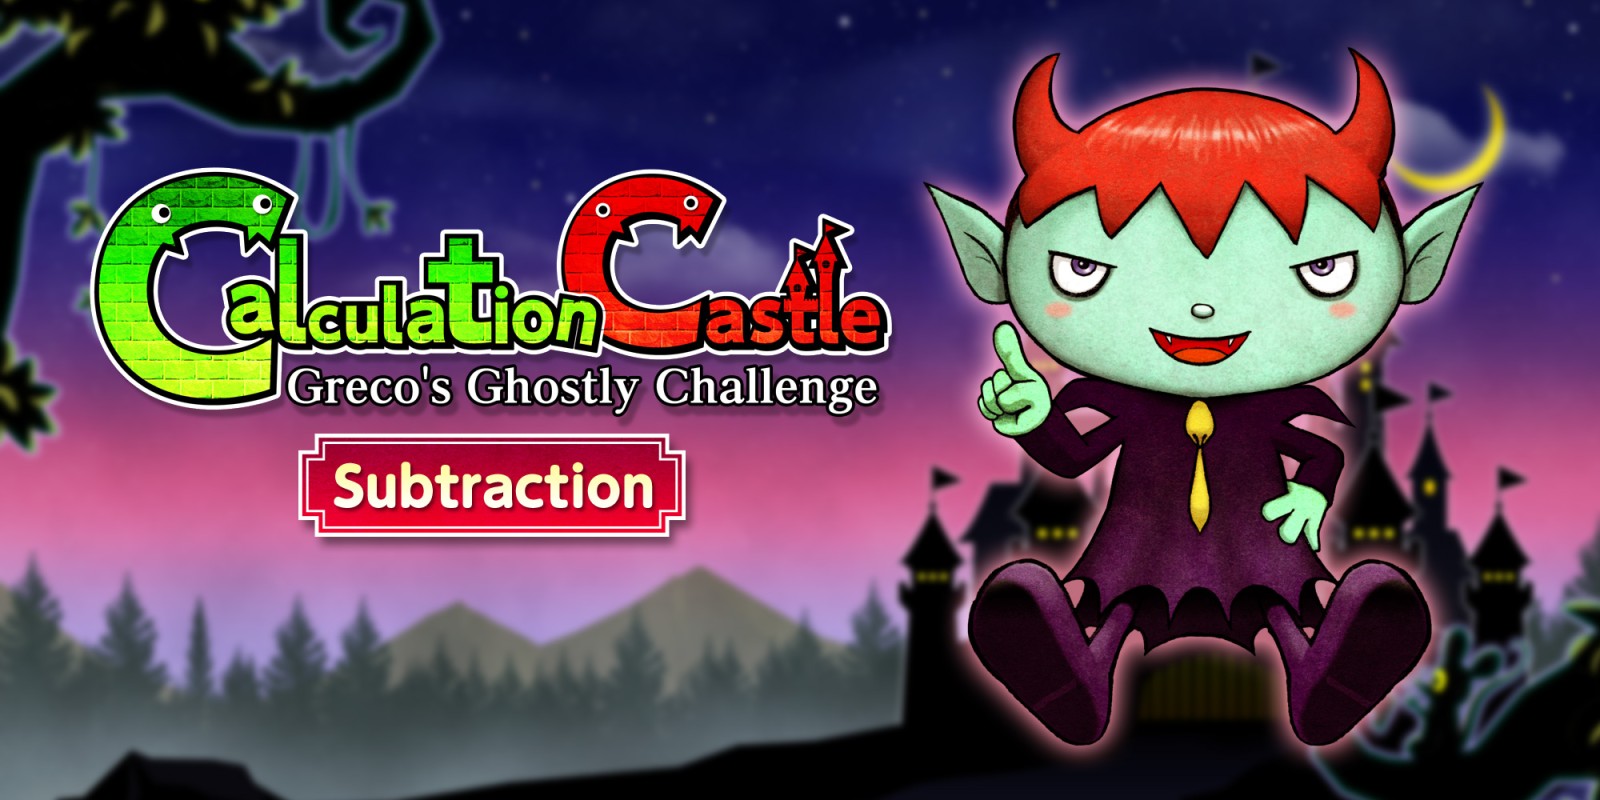 Calculation Castle: Greco's Ghostly Challenge "Subtraction"